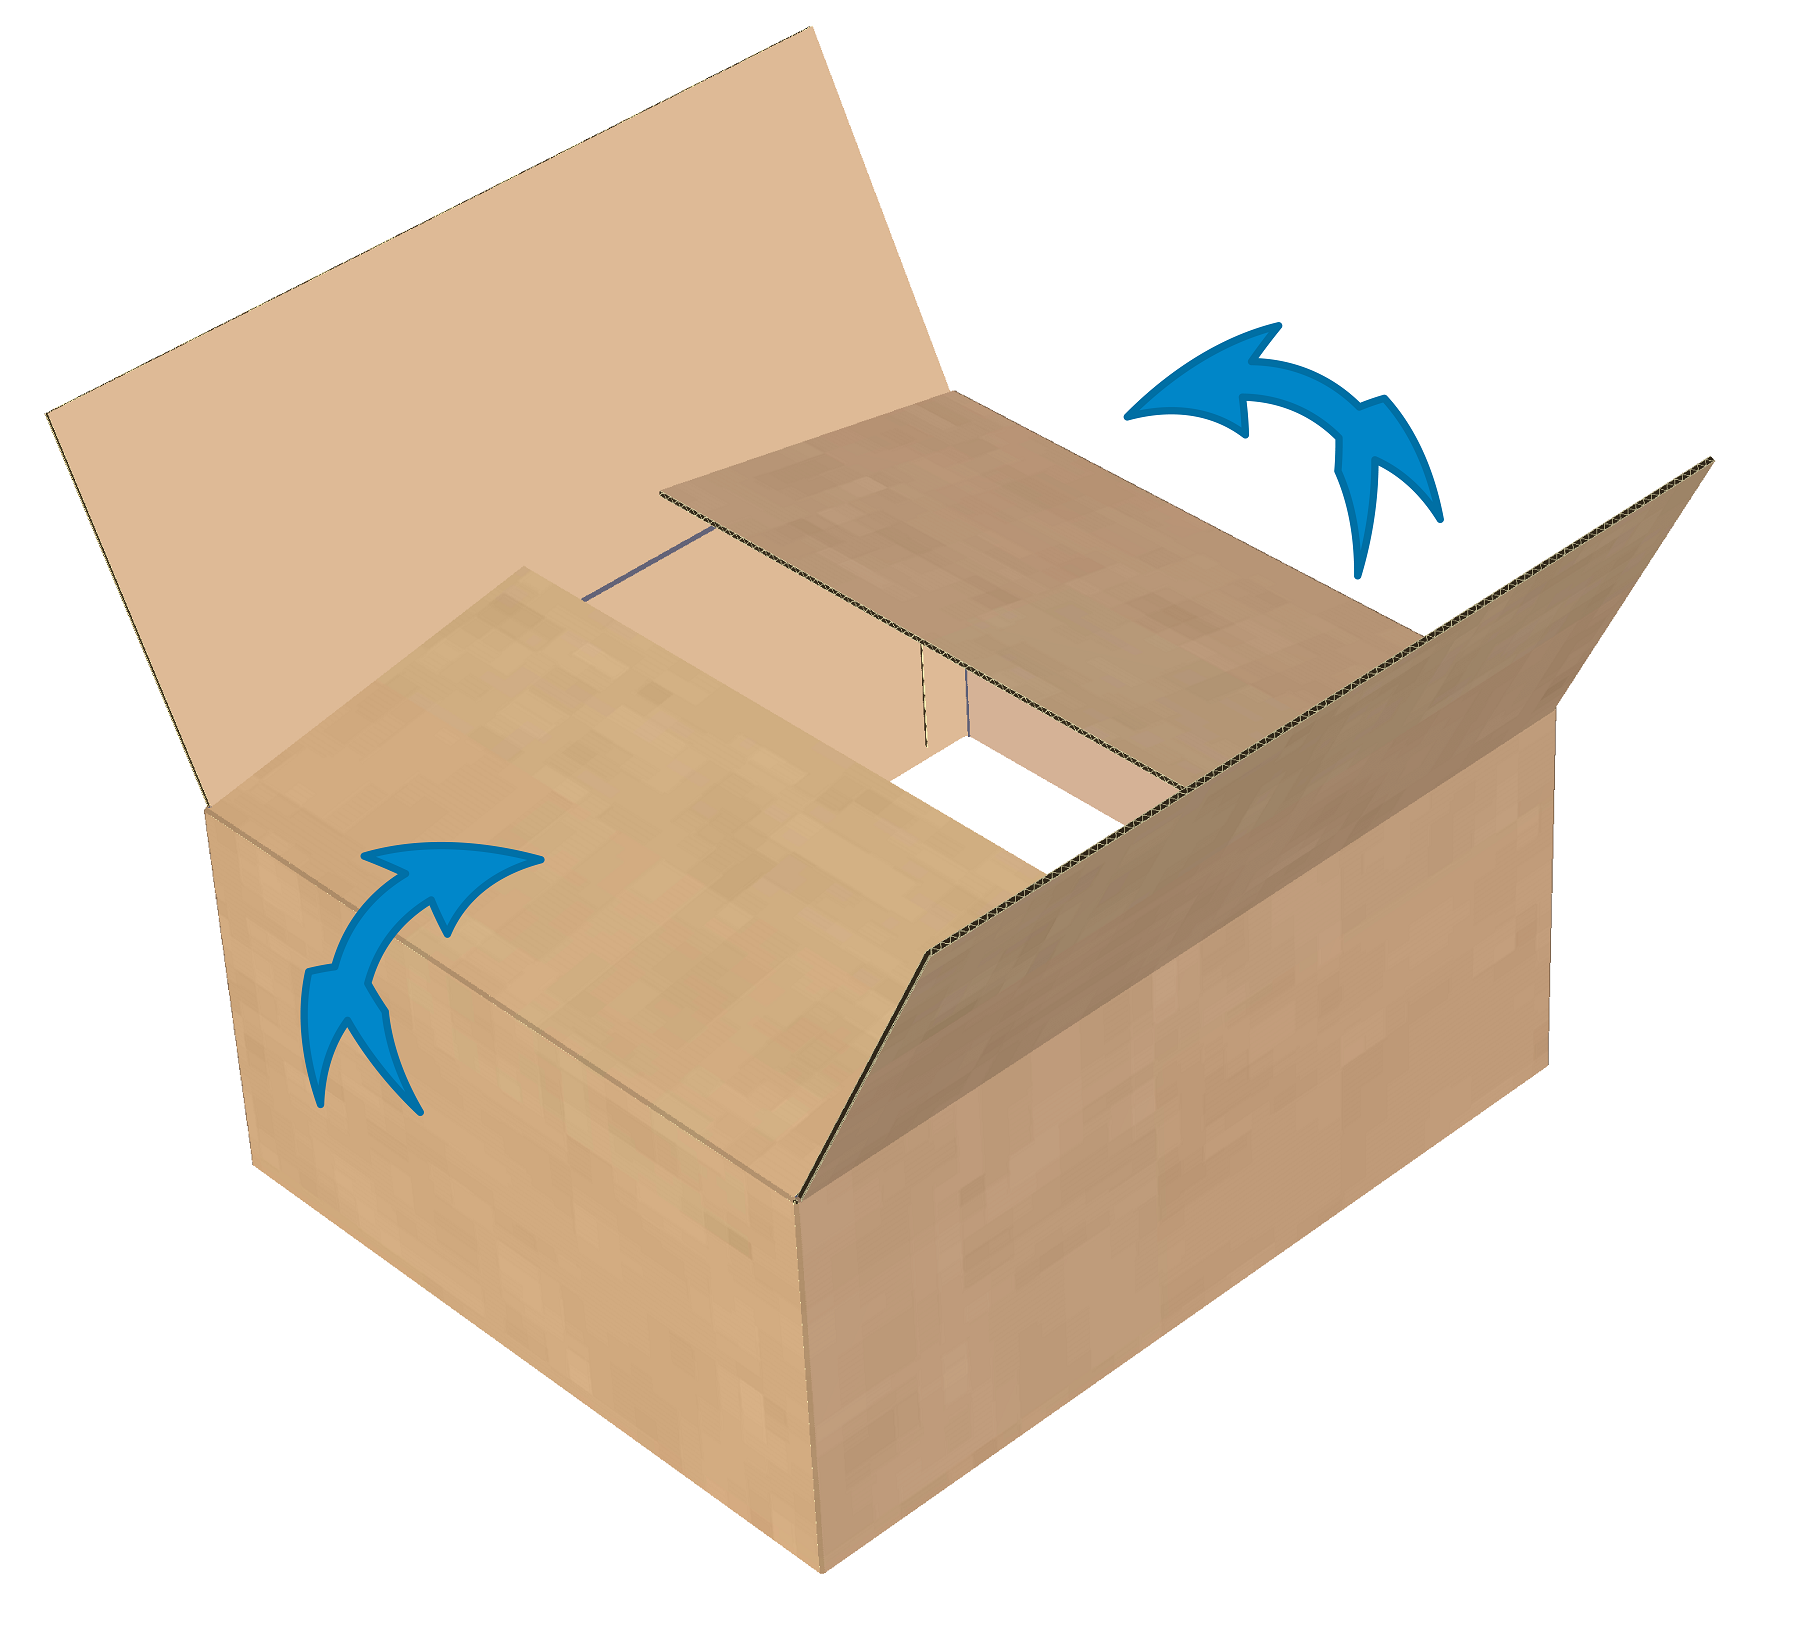 Fold the short flaps to close the half-slot container box. 